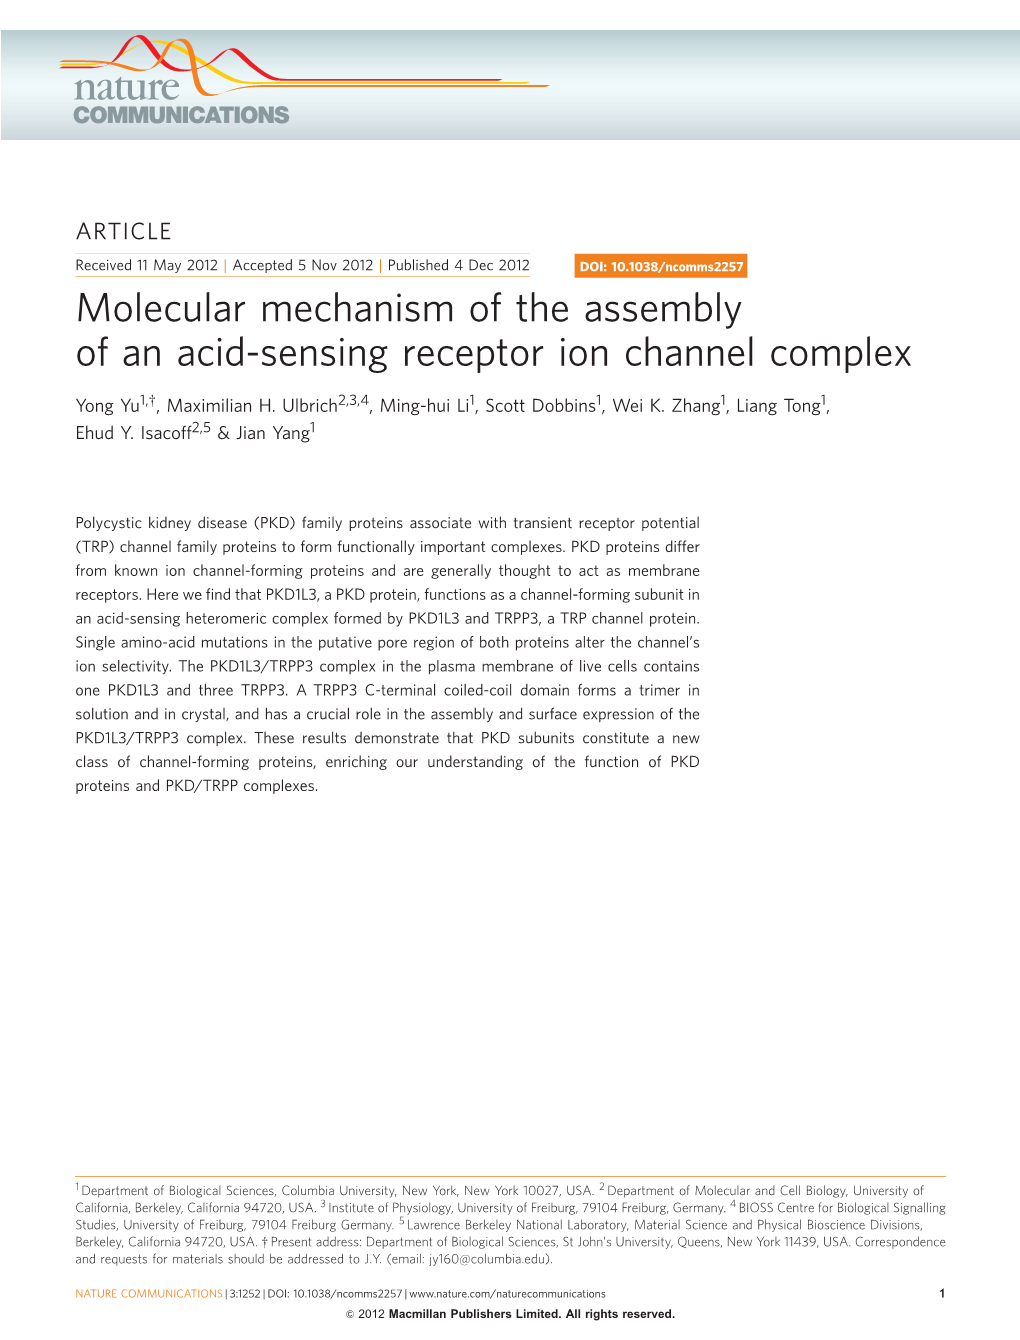 Molecular Mechanism of the Assembly of an Acid-Sensing Receptor Ion Channel Complex